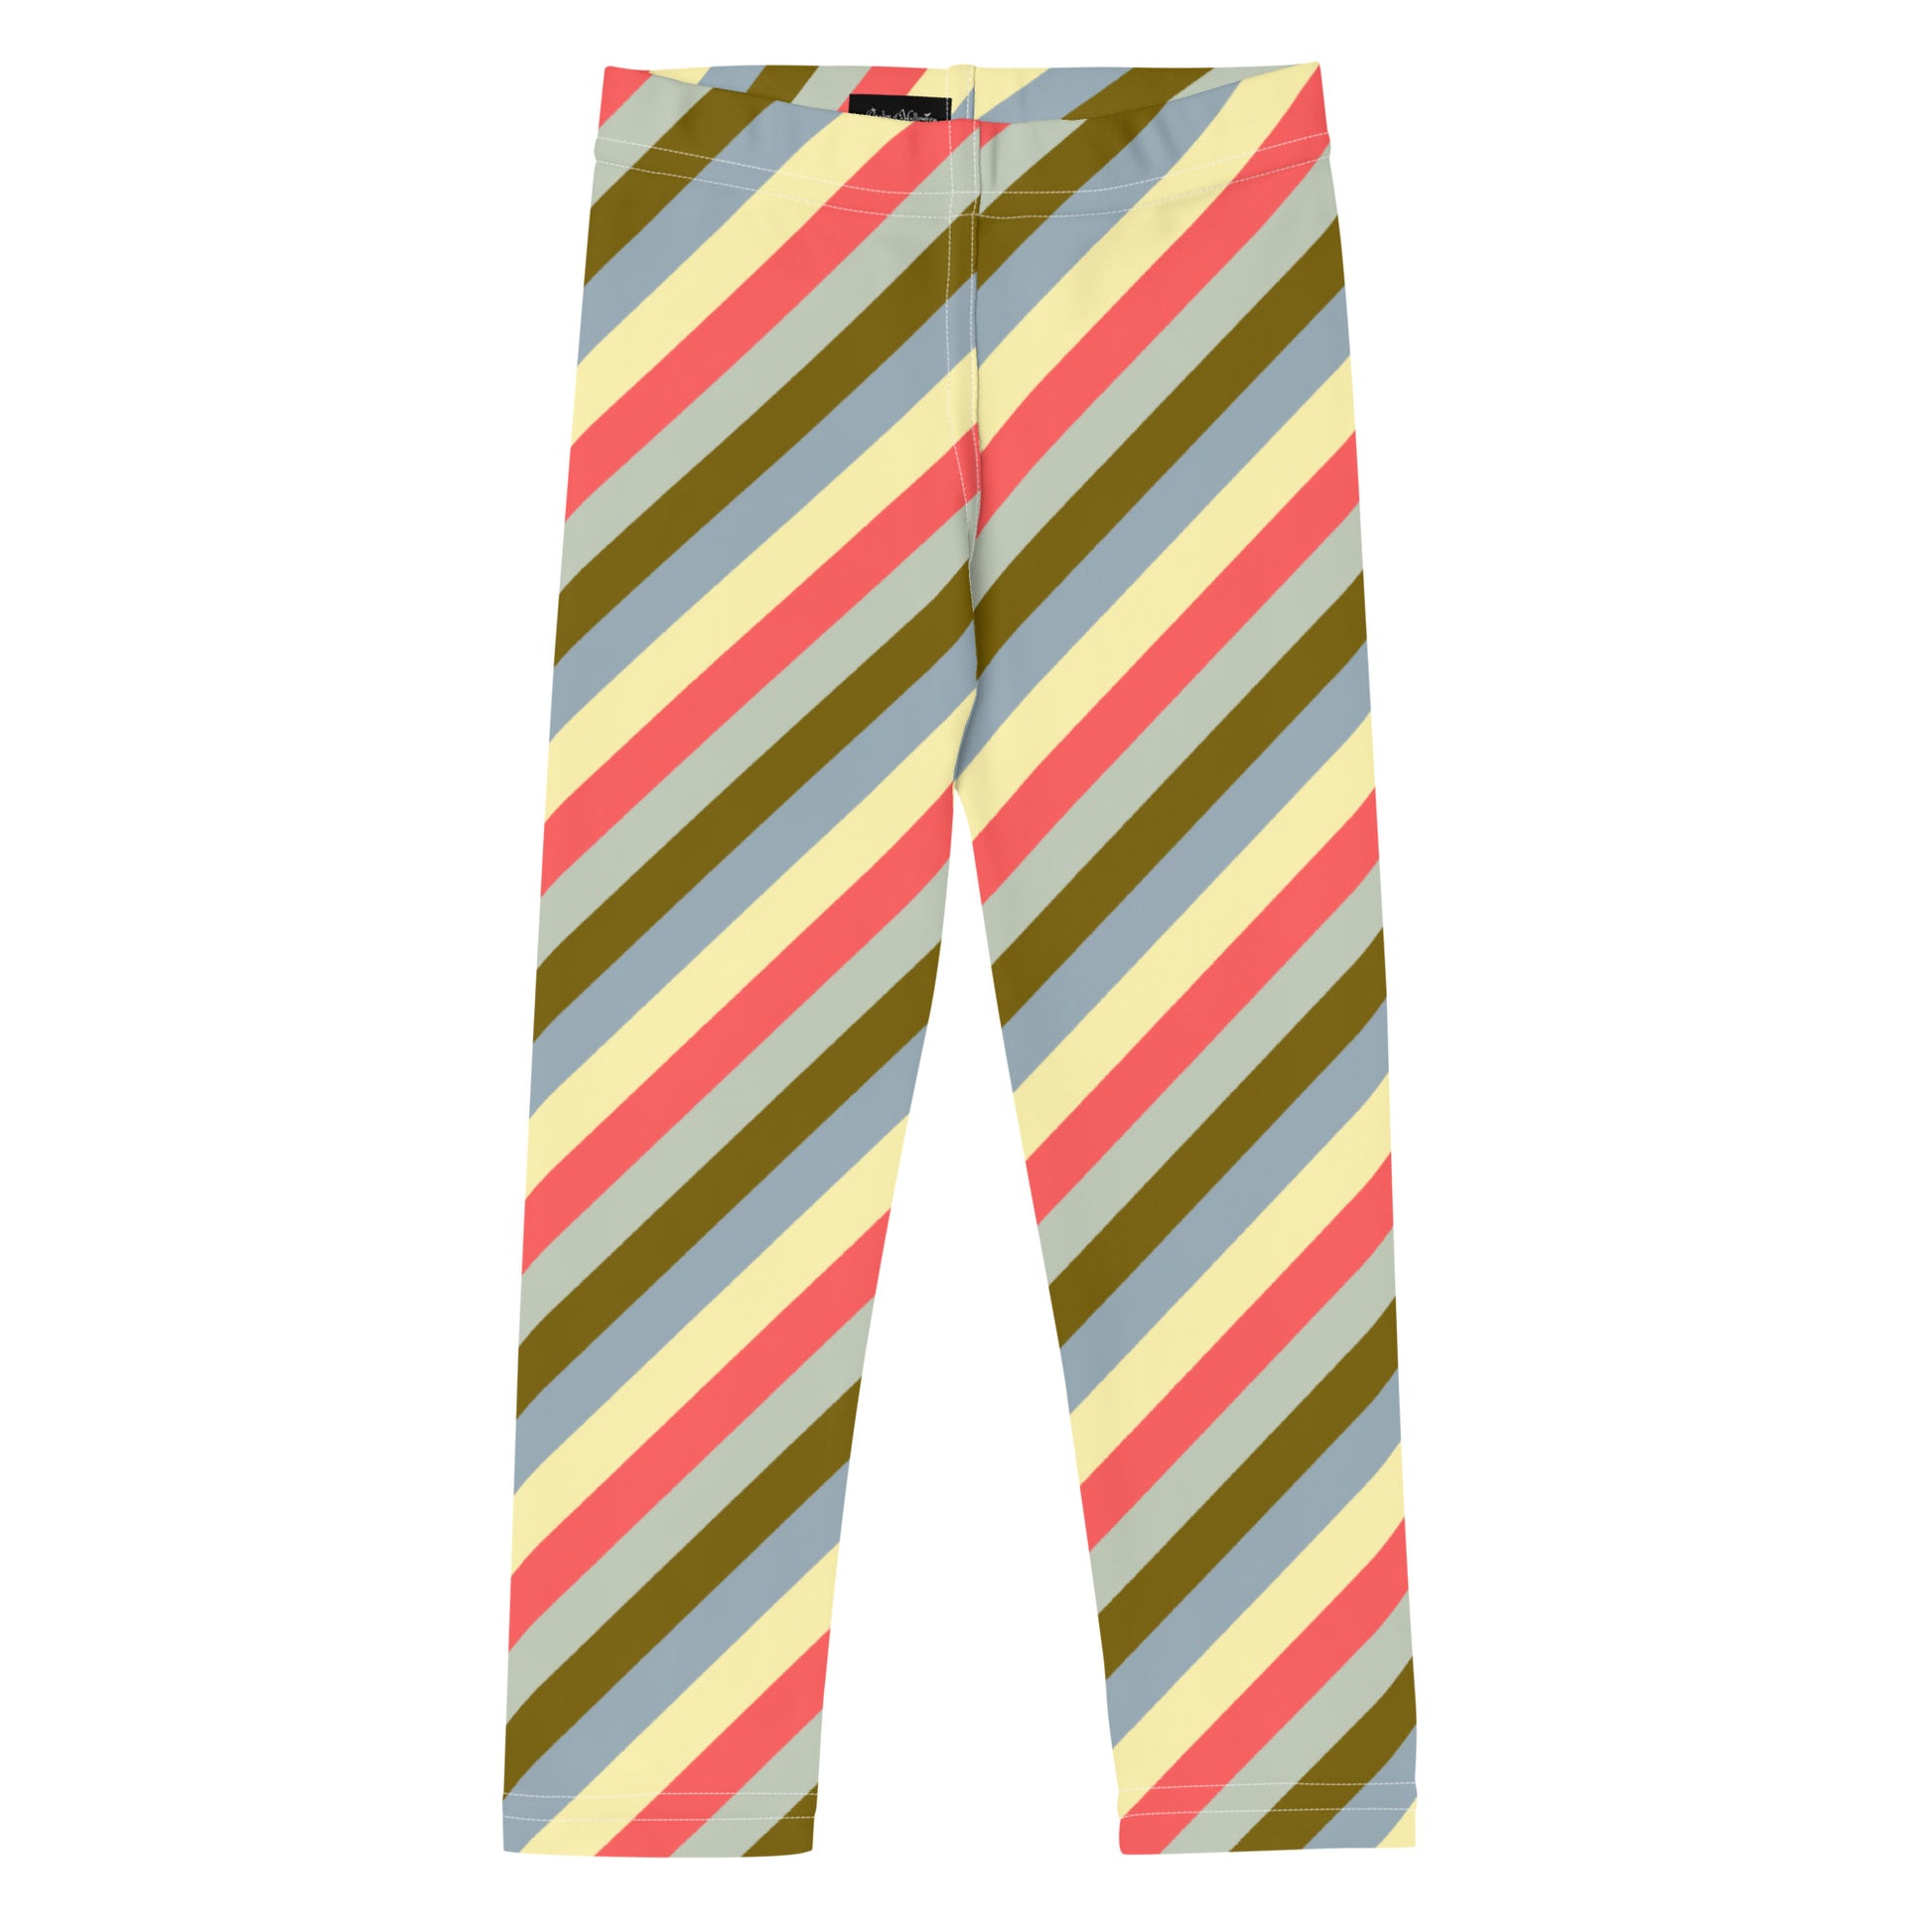 Black and Cream Horizontal Striped Children's Legging, from the